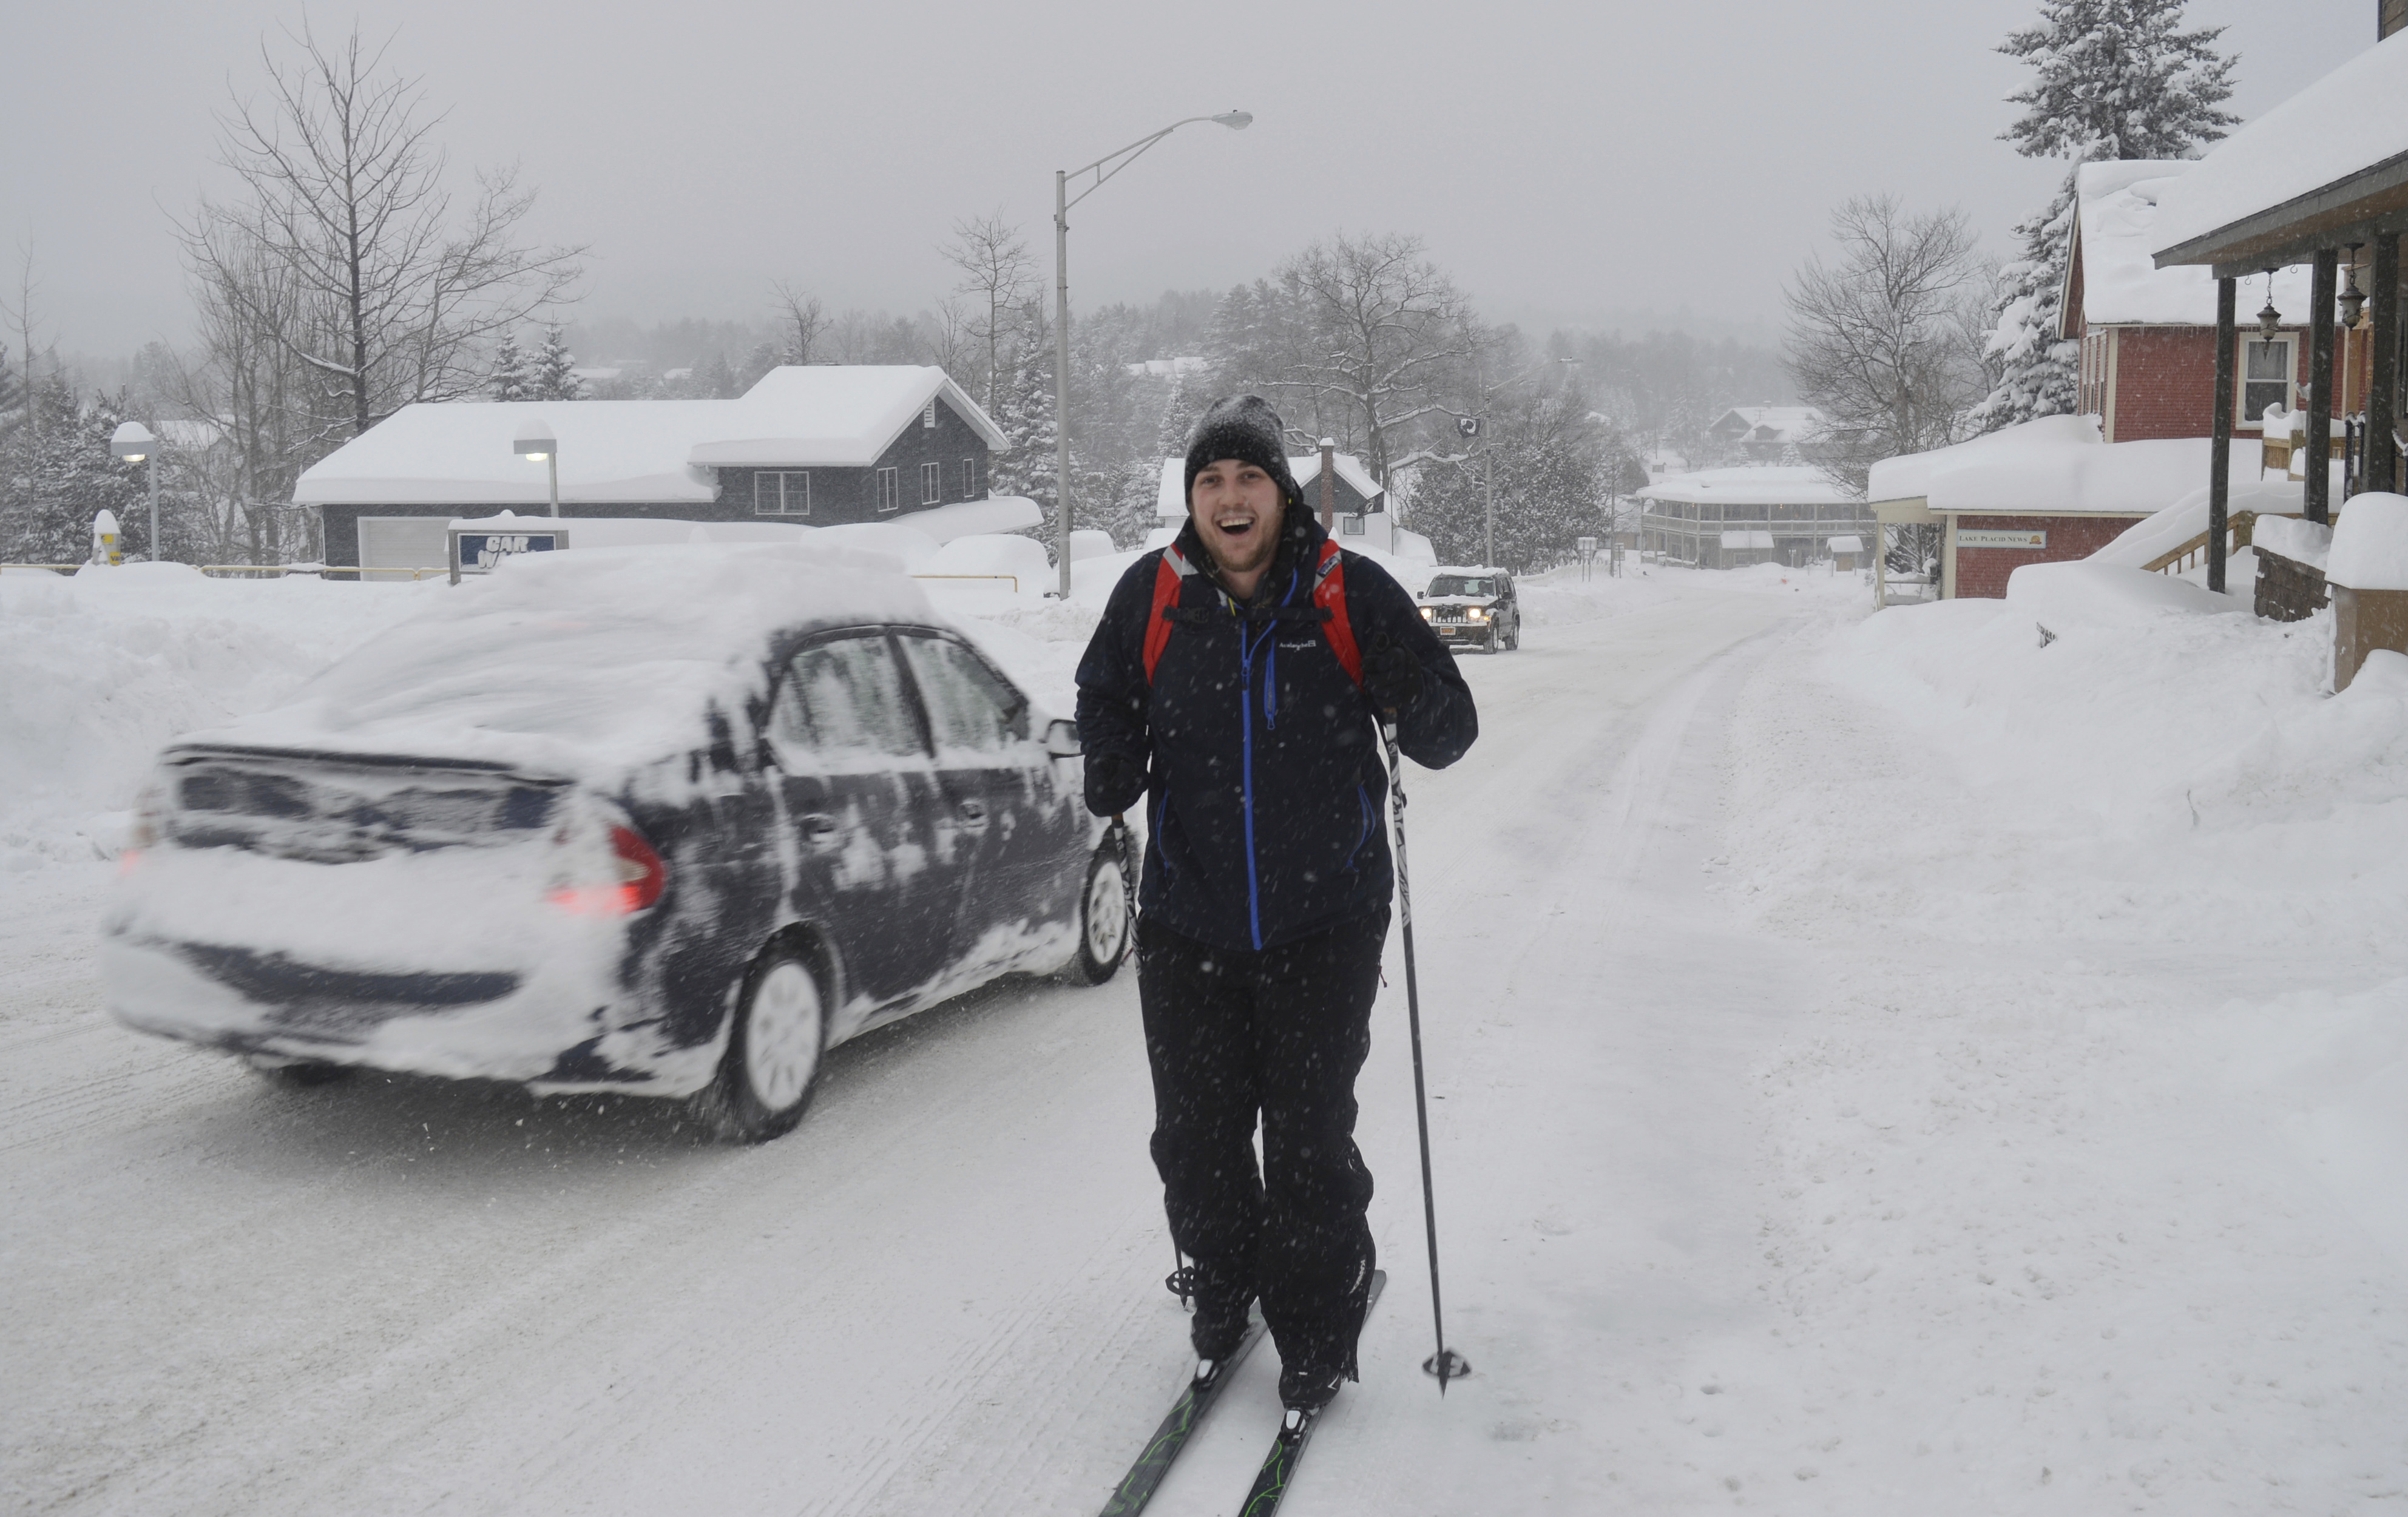 Alex Hudson cross-country skis up Sentinel Road in Lake Placid, New York, Wednesday morning, March 15, 2017, on his way to work.
(Photo — Antonio Olivero, Adirondack Daily Enterprise)